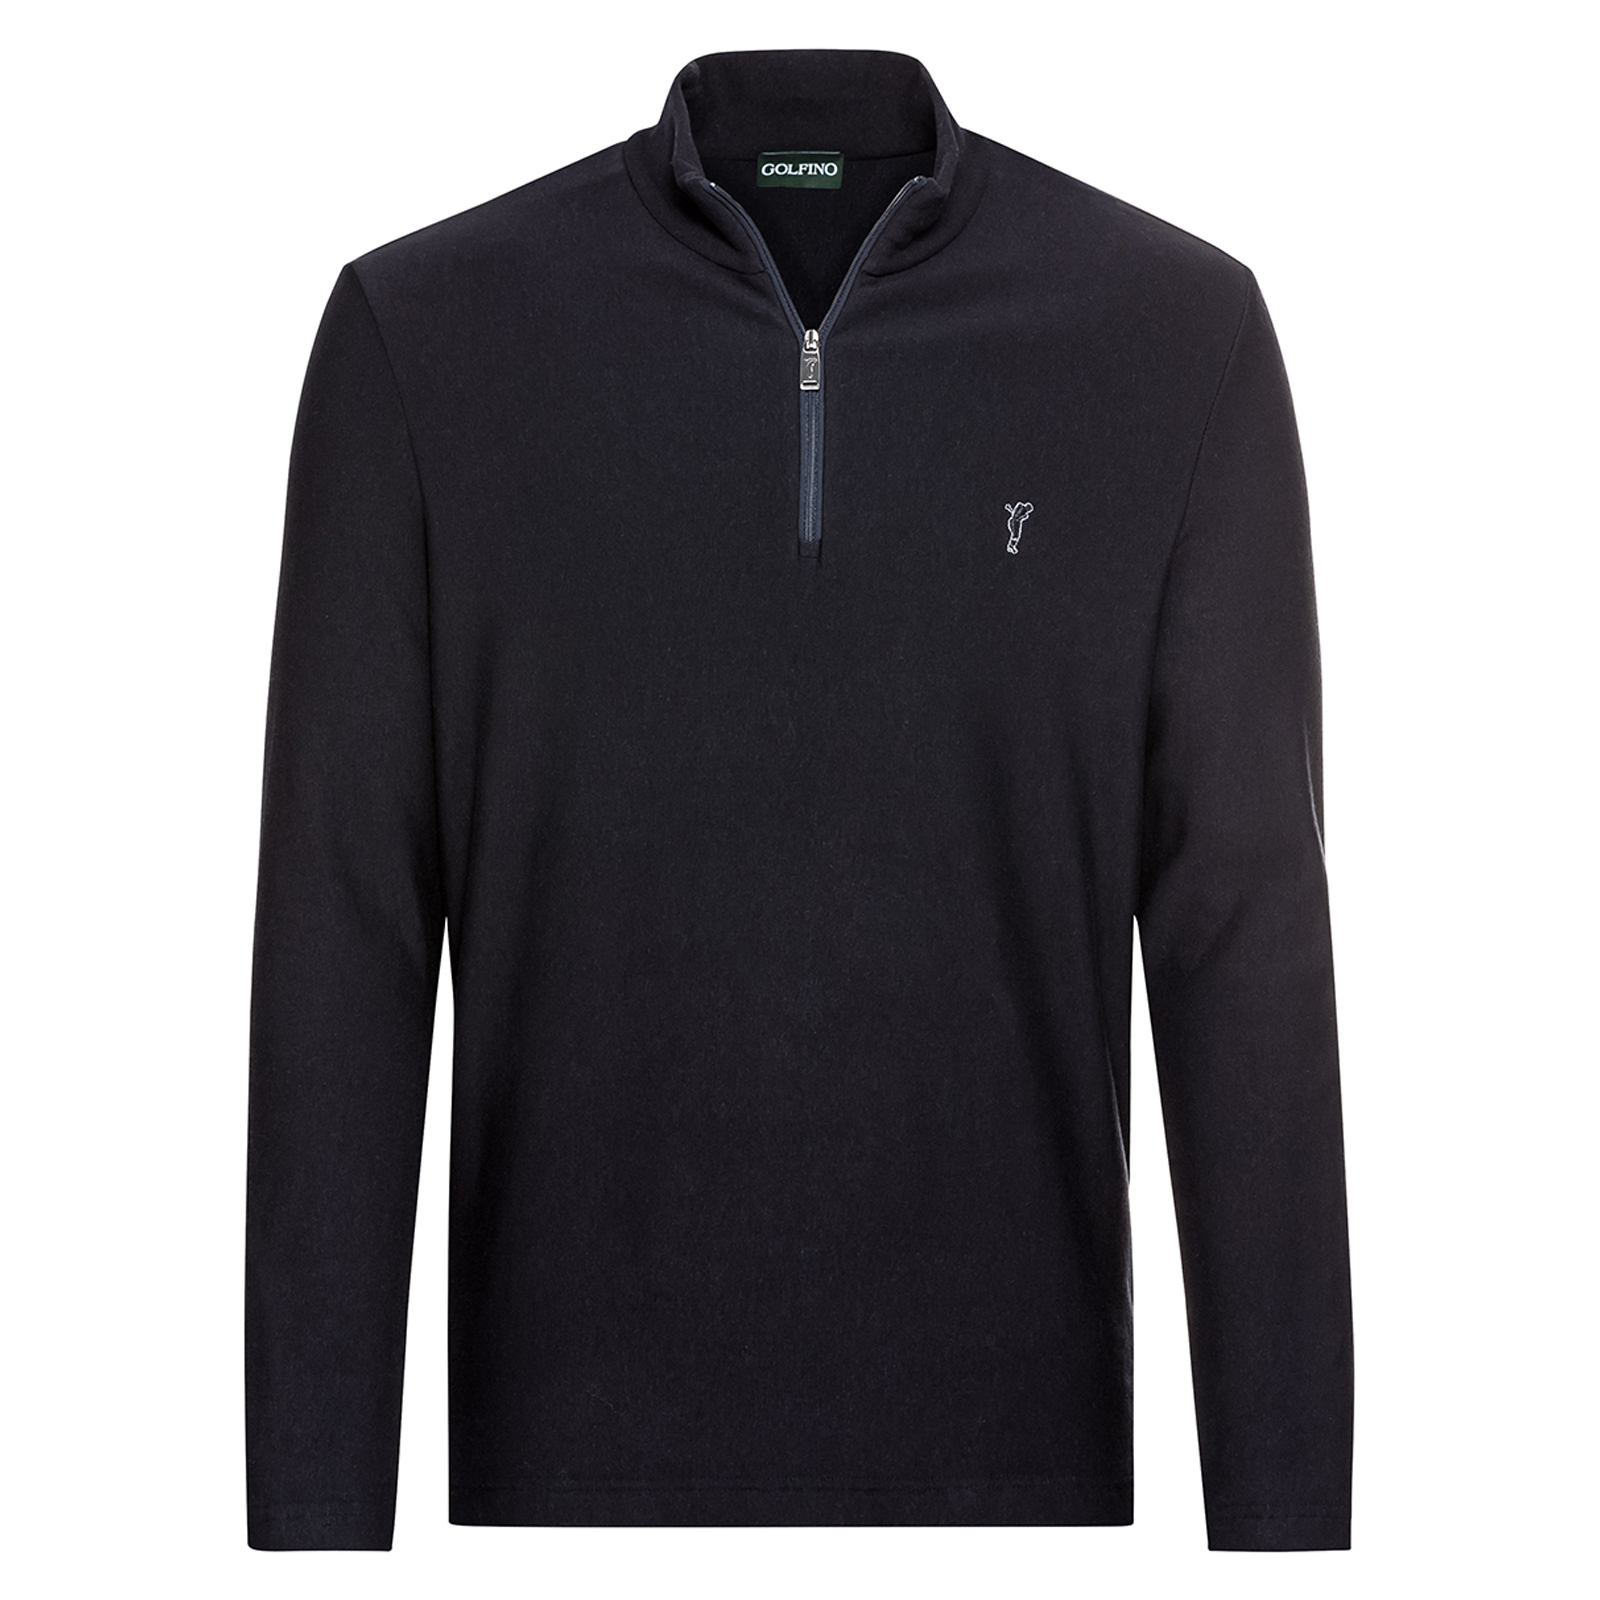 Men's golf sweater with Tencel component 